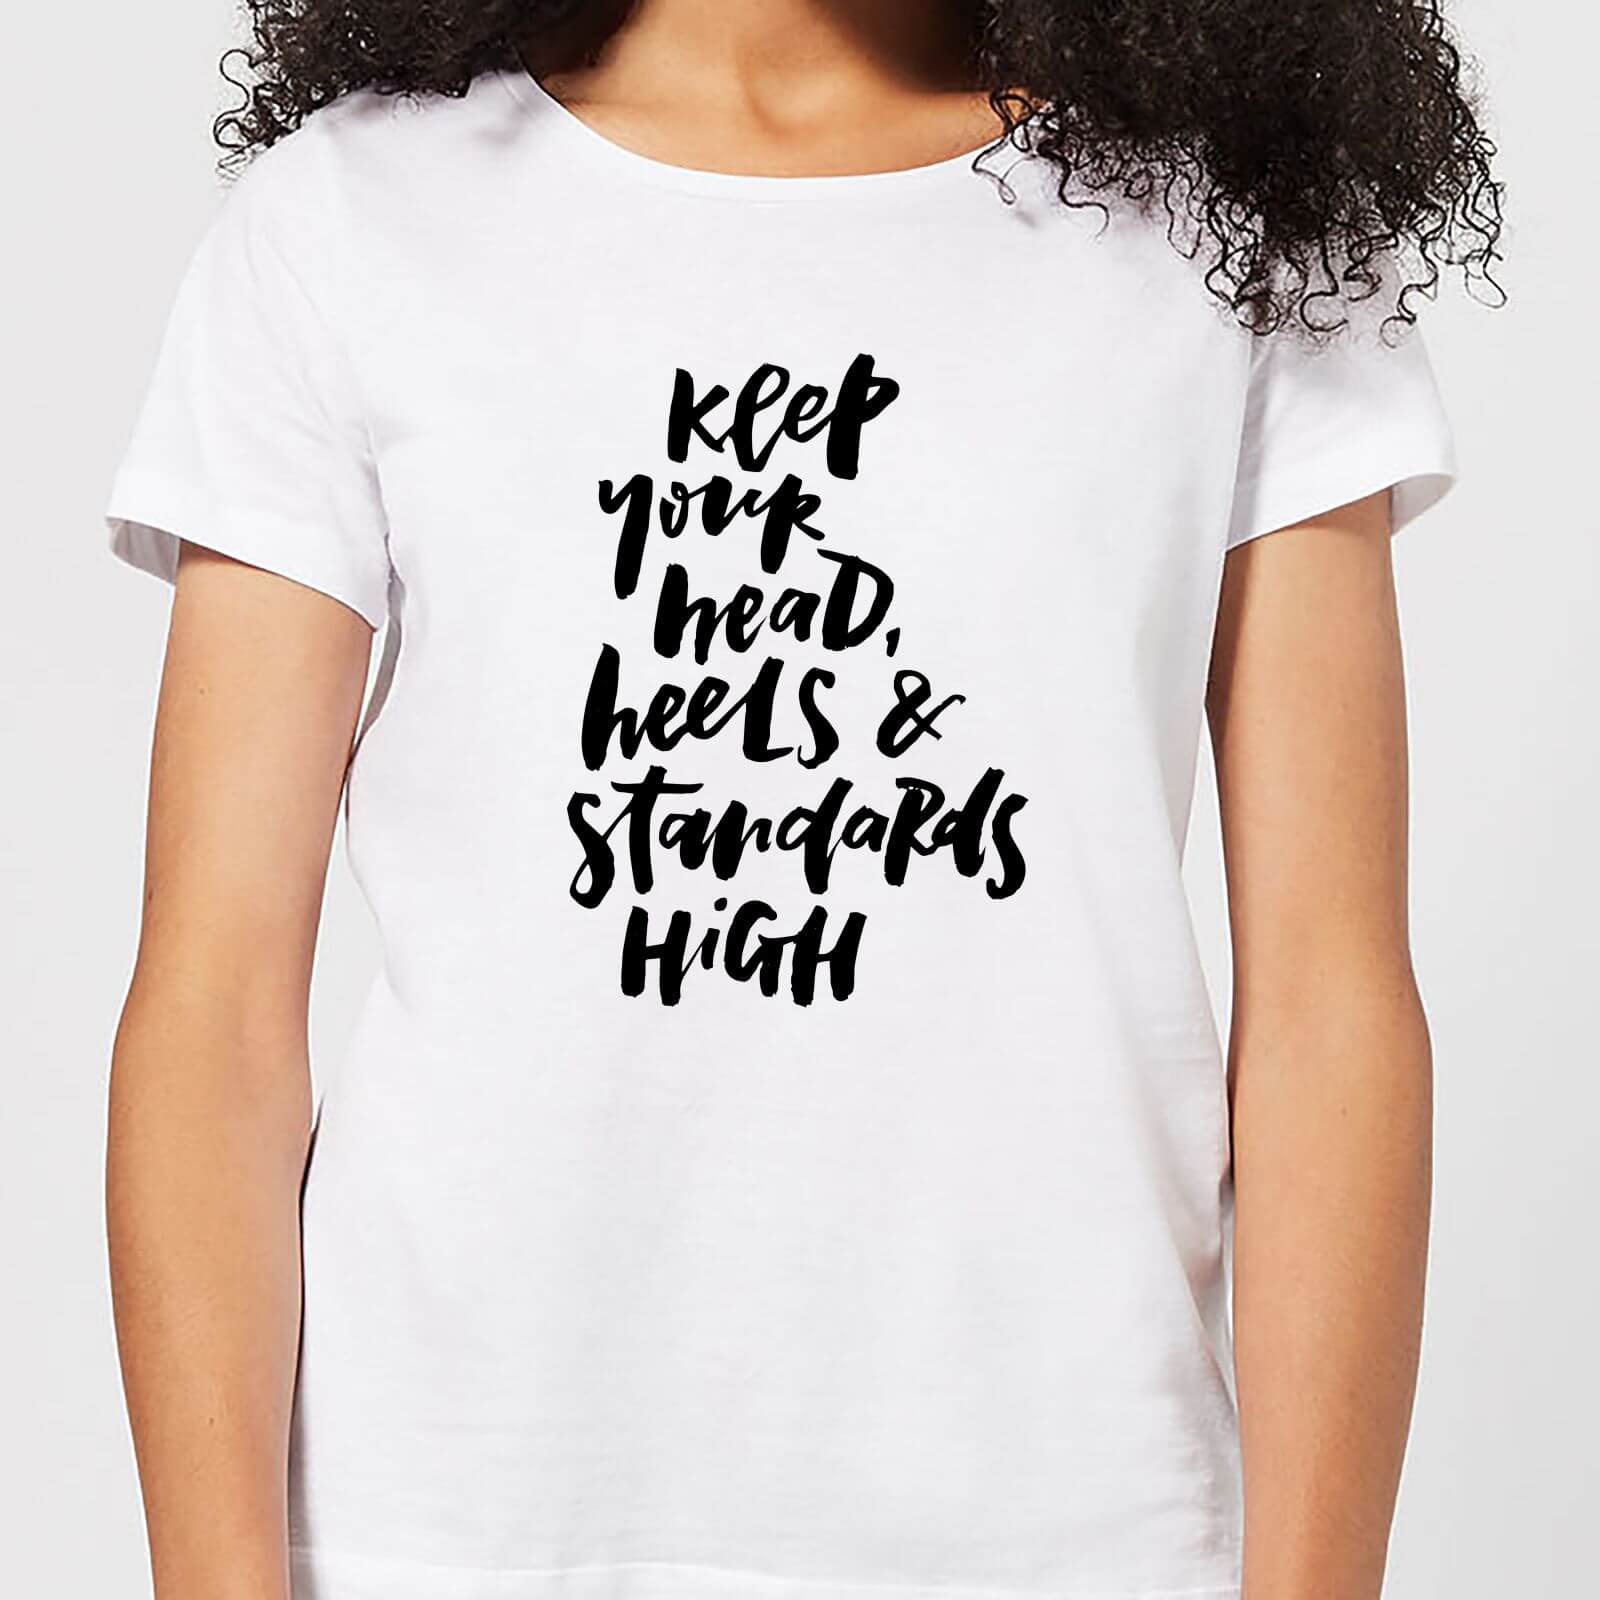 Keep Your Head, Heels and Standards High Women's T-Shirt - White - S - White